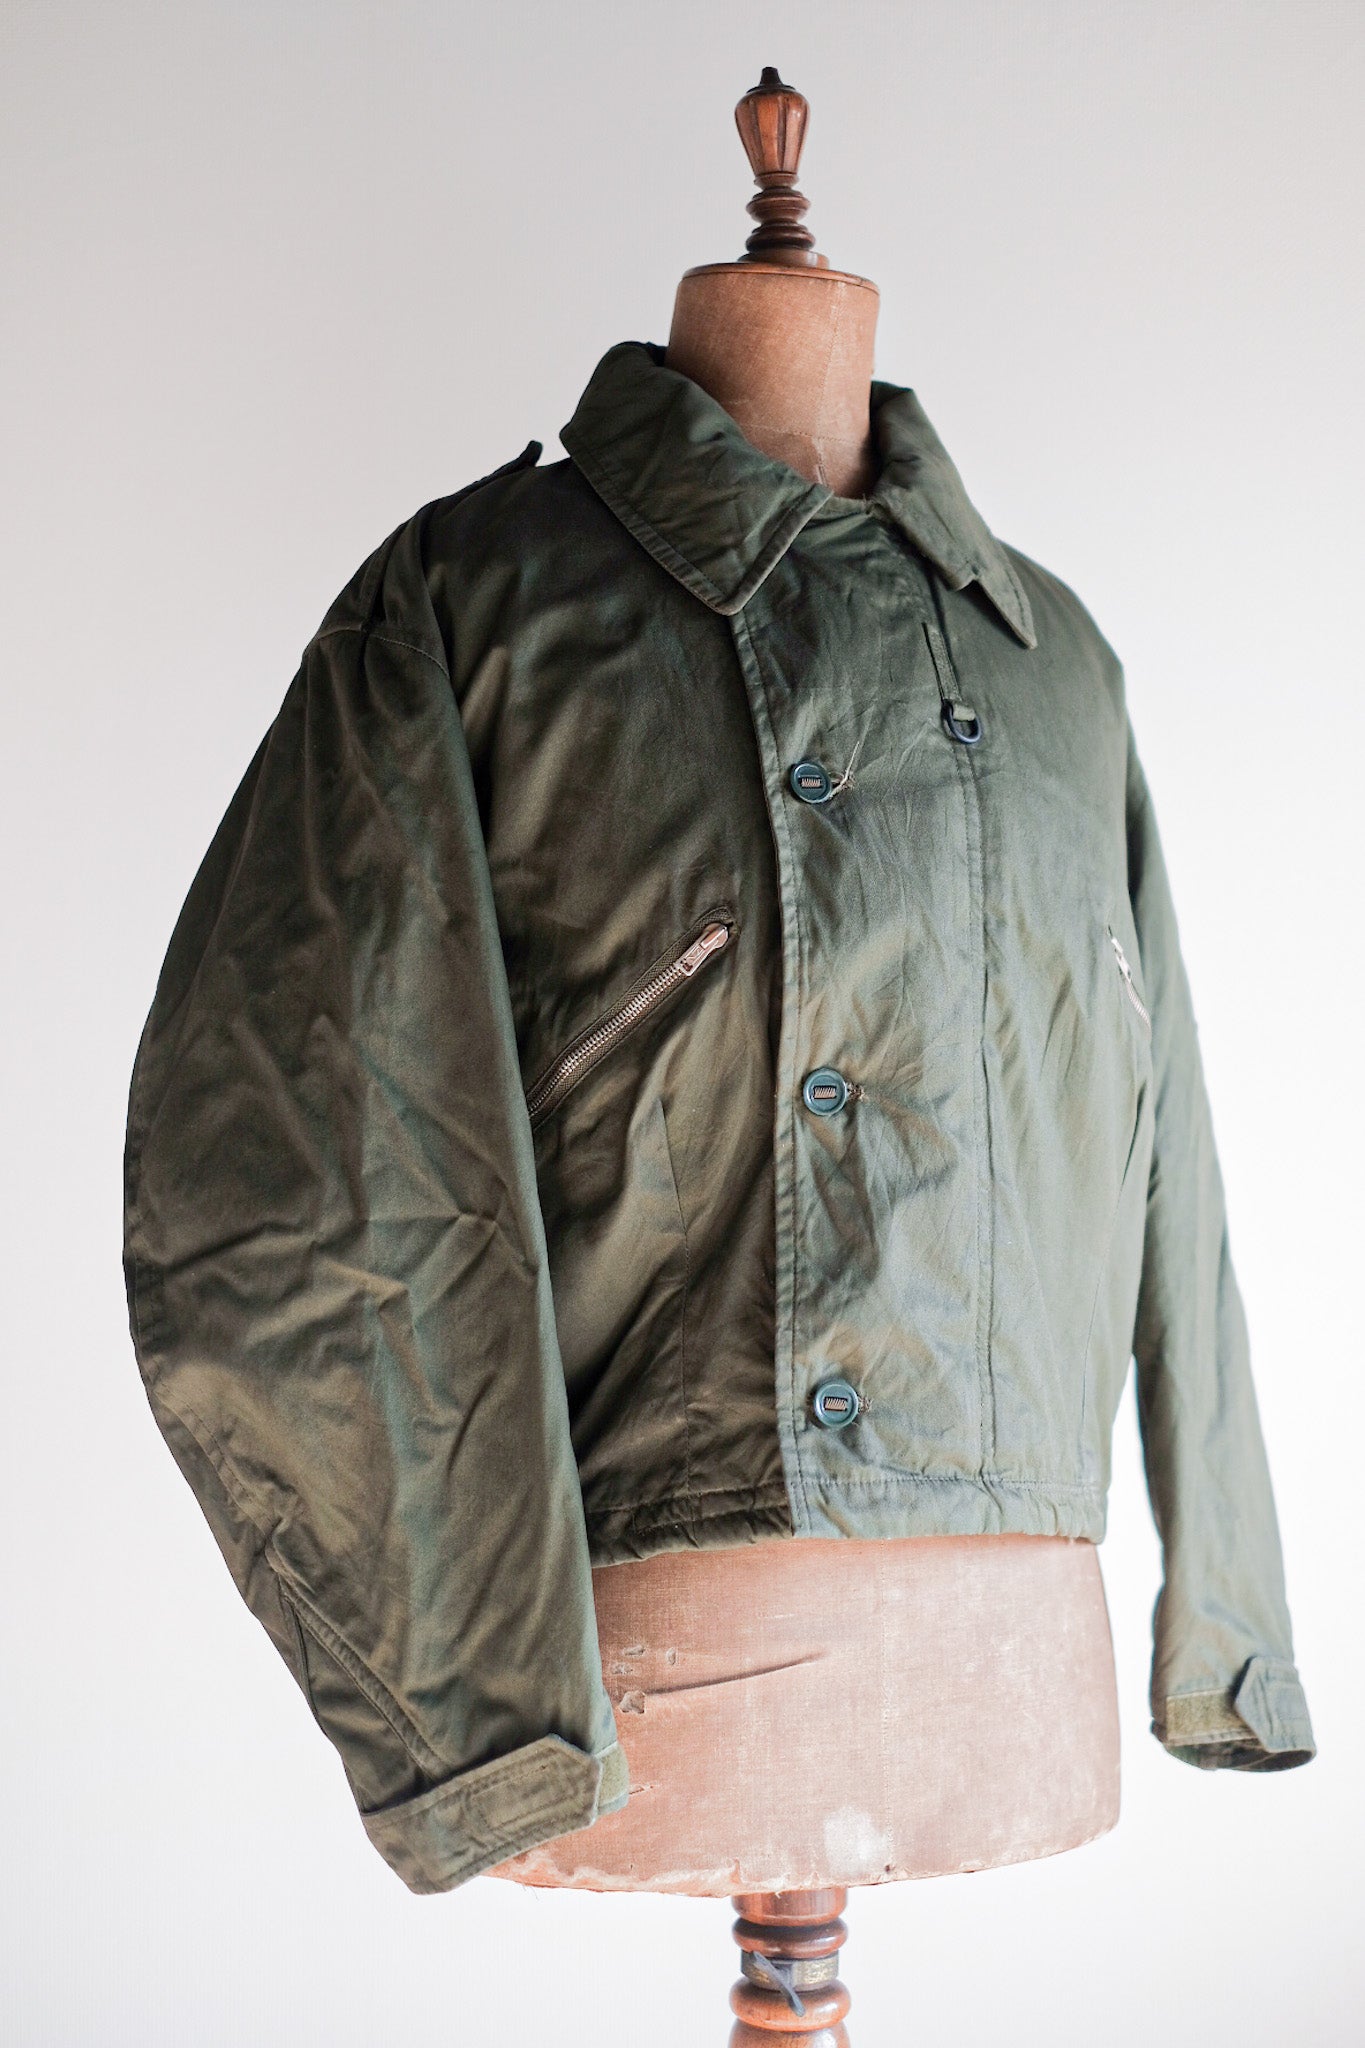 80's] ROYAL AIR FORCE MK3 COLD WEATHER FLYING JACKET SIZE.4